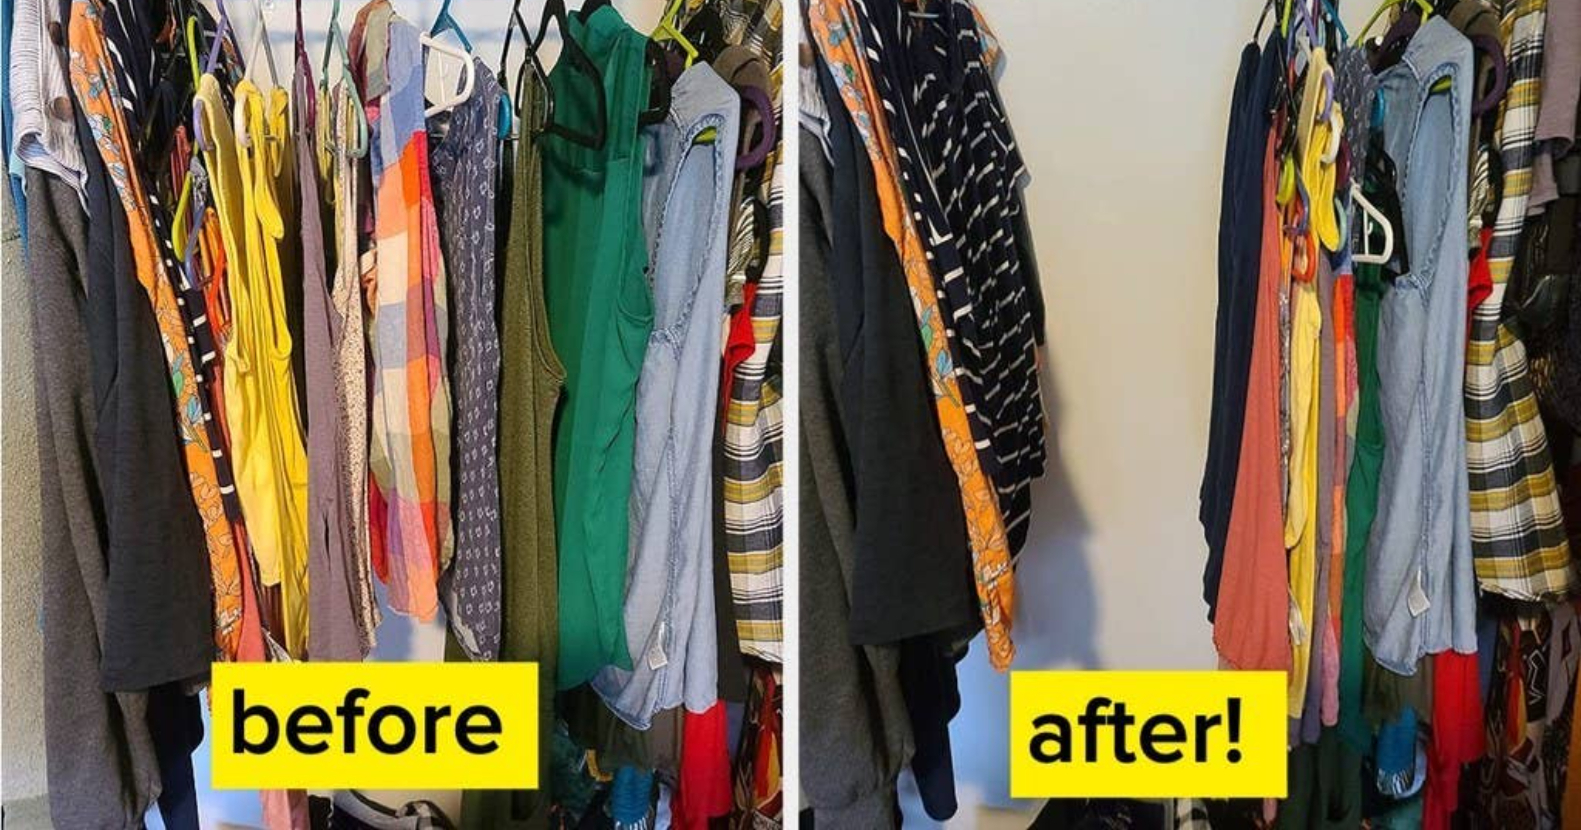 25 Closet Organizers To Make Space For Winter Clothes